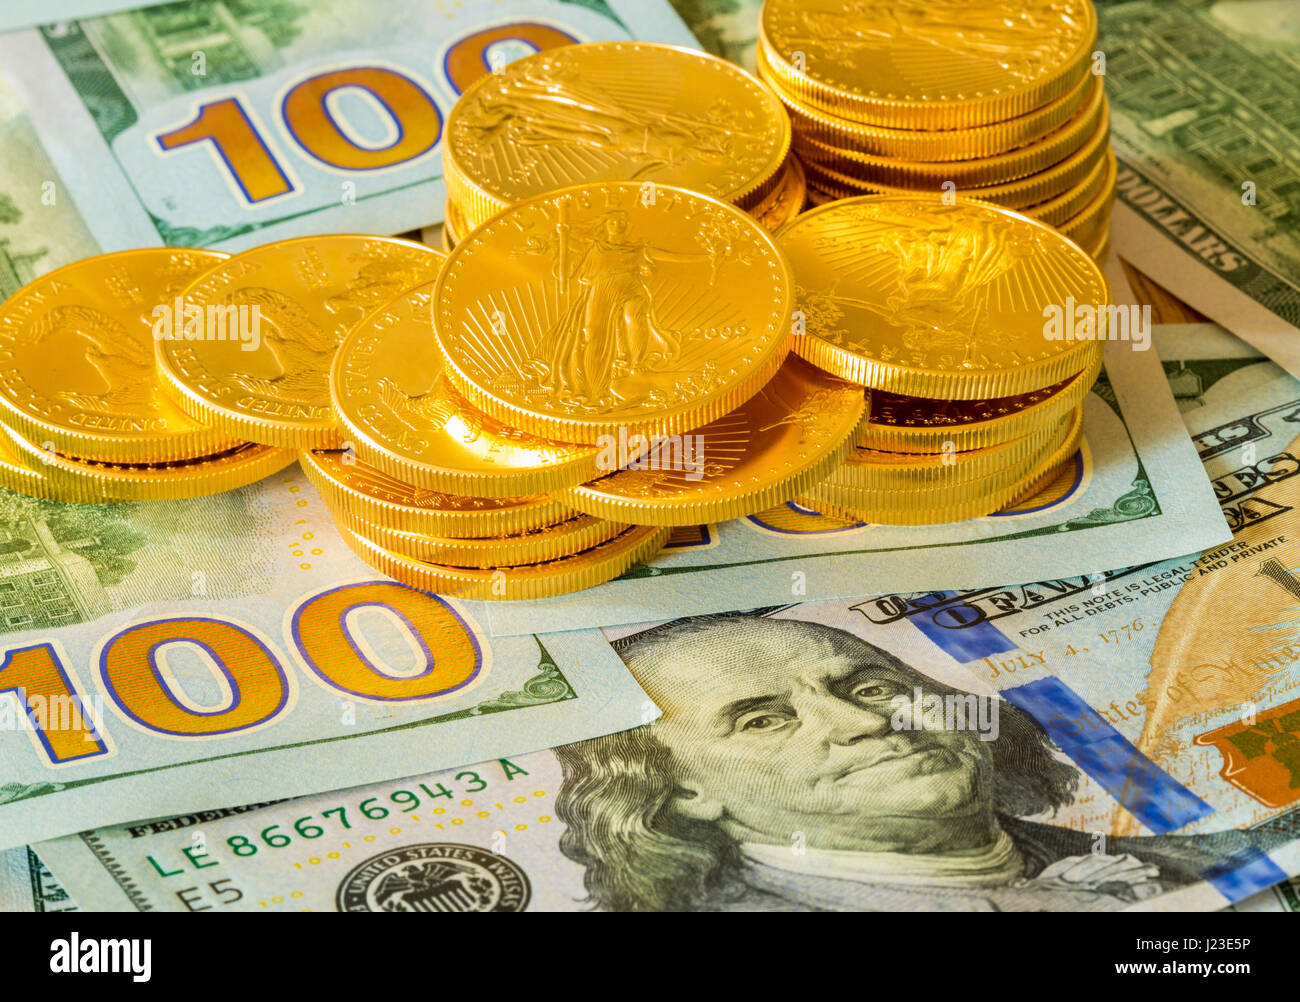 Stack of American gold eagle gold bullion coins on new design of US currency 100 dollar bills Stock Photo